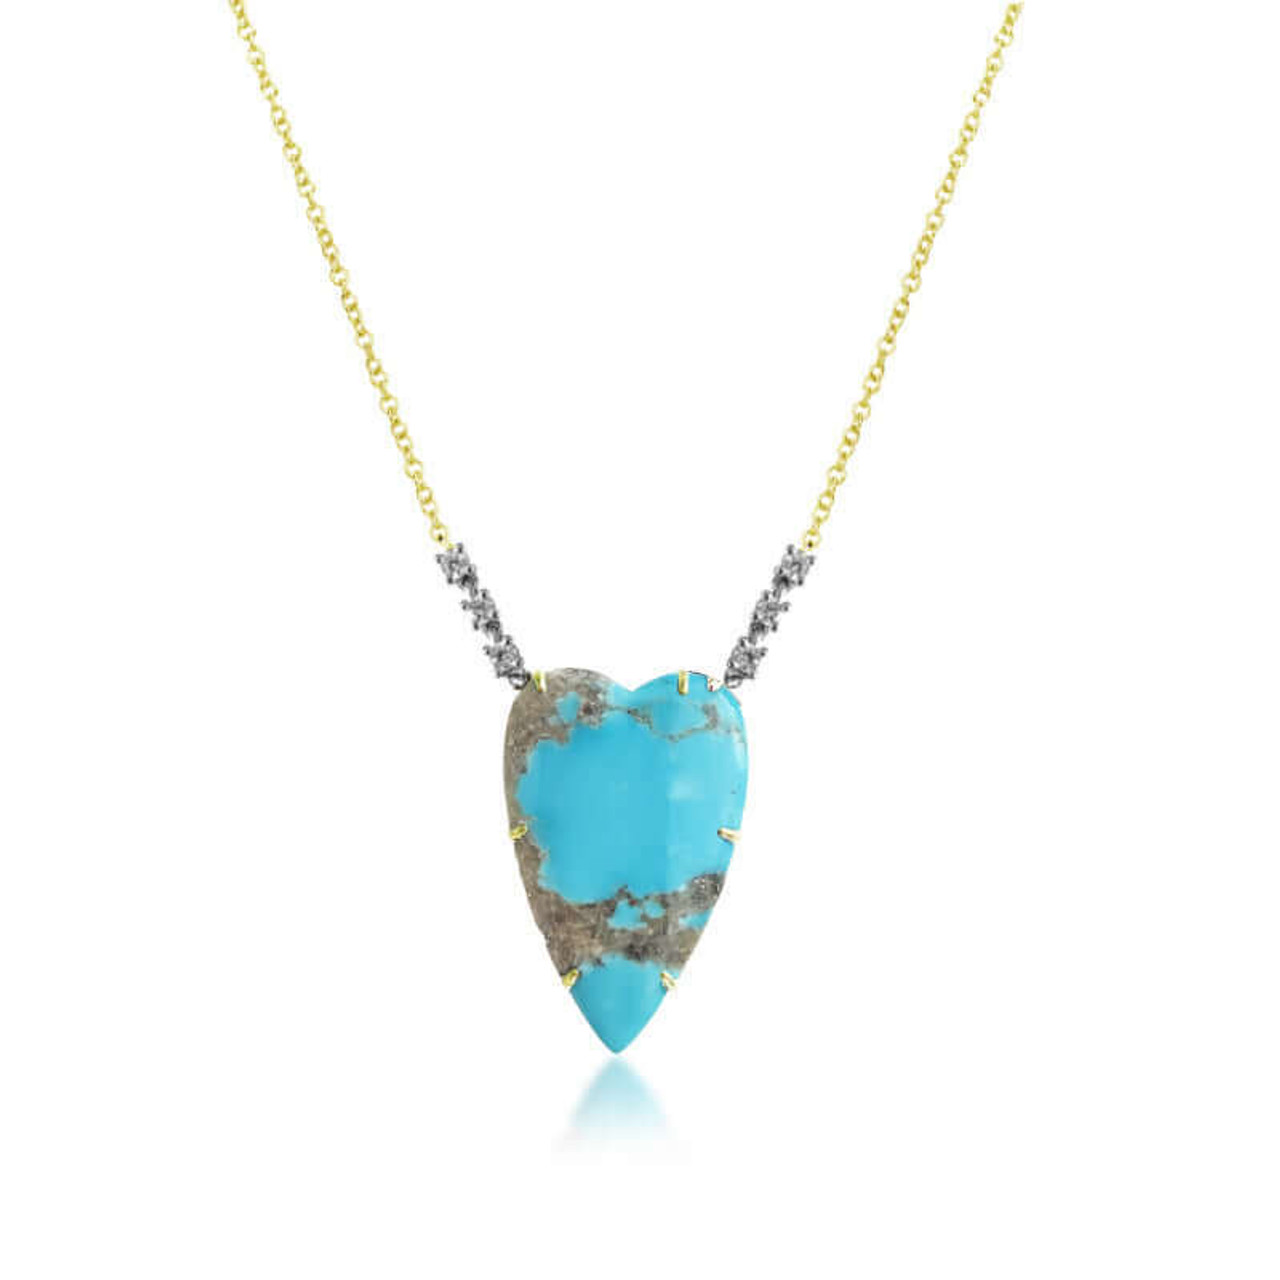 Turquoise Necklace with Crystal Charms - Summer Jewelry for Her